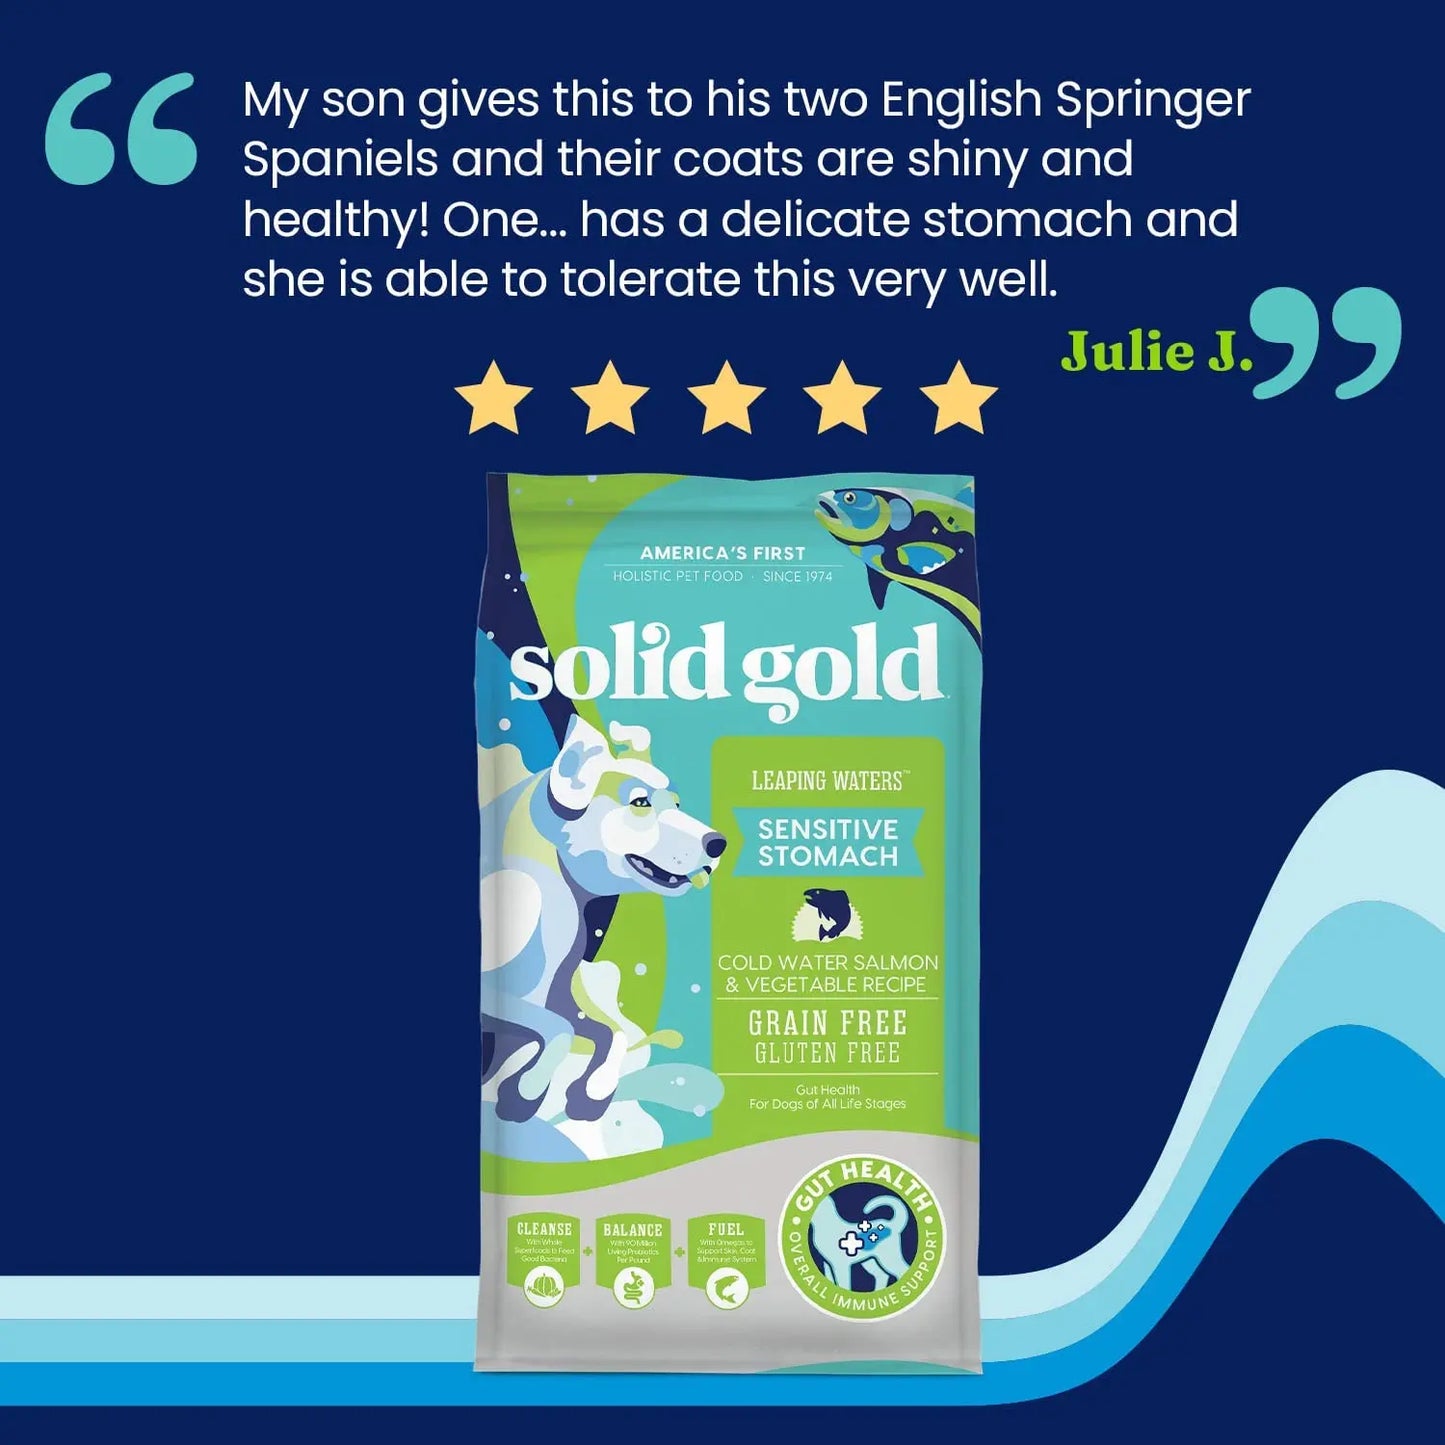 Solid Gold® Leaping Waters Grain Free Cold Water Salmon & Vegetable Recipe Dog Food Solid Gold